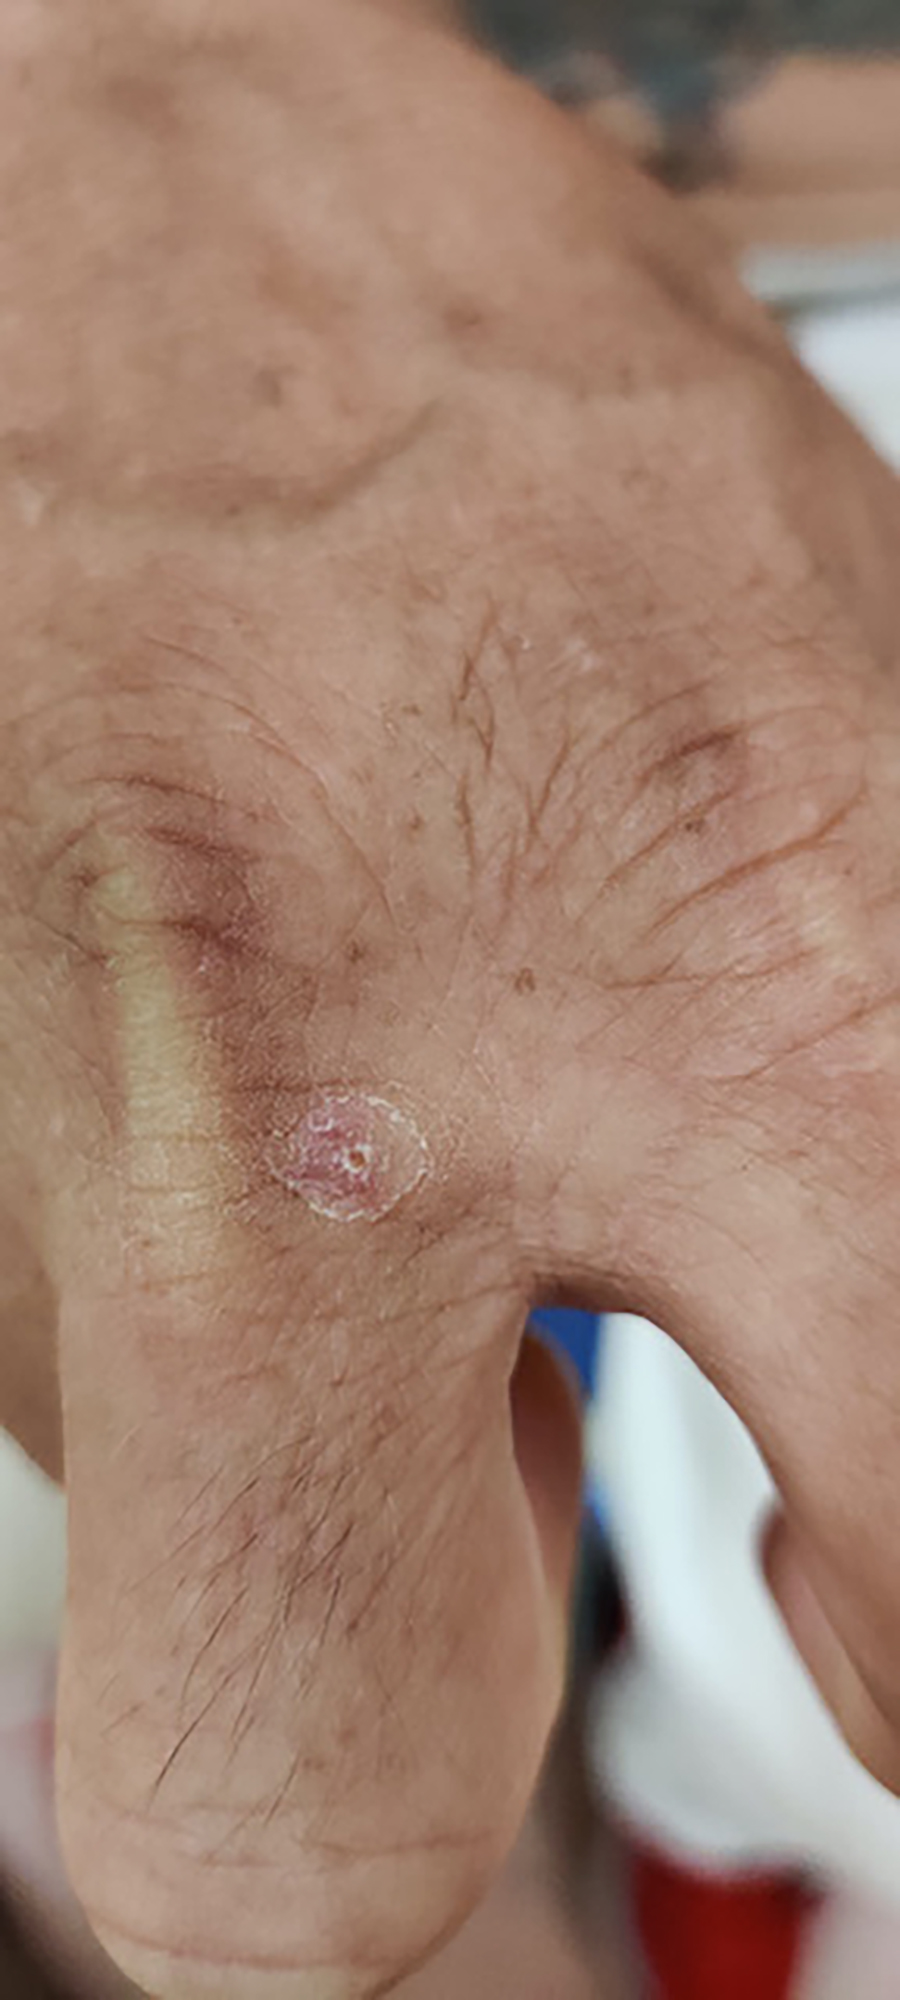 Secondary healed lesion IP right